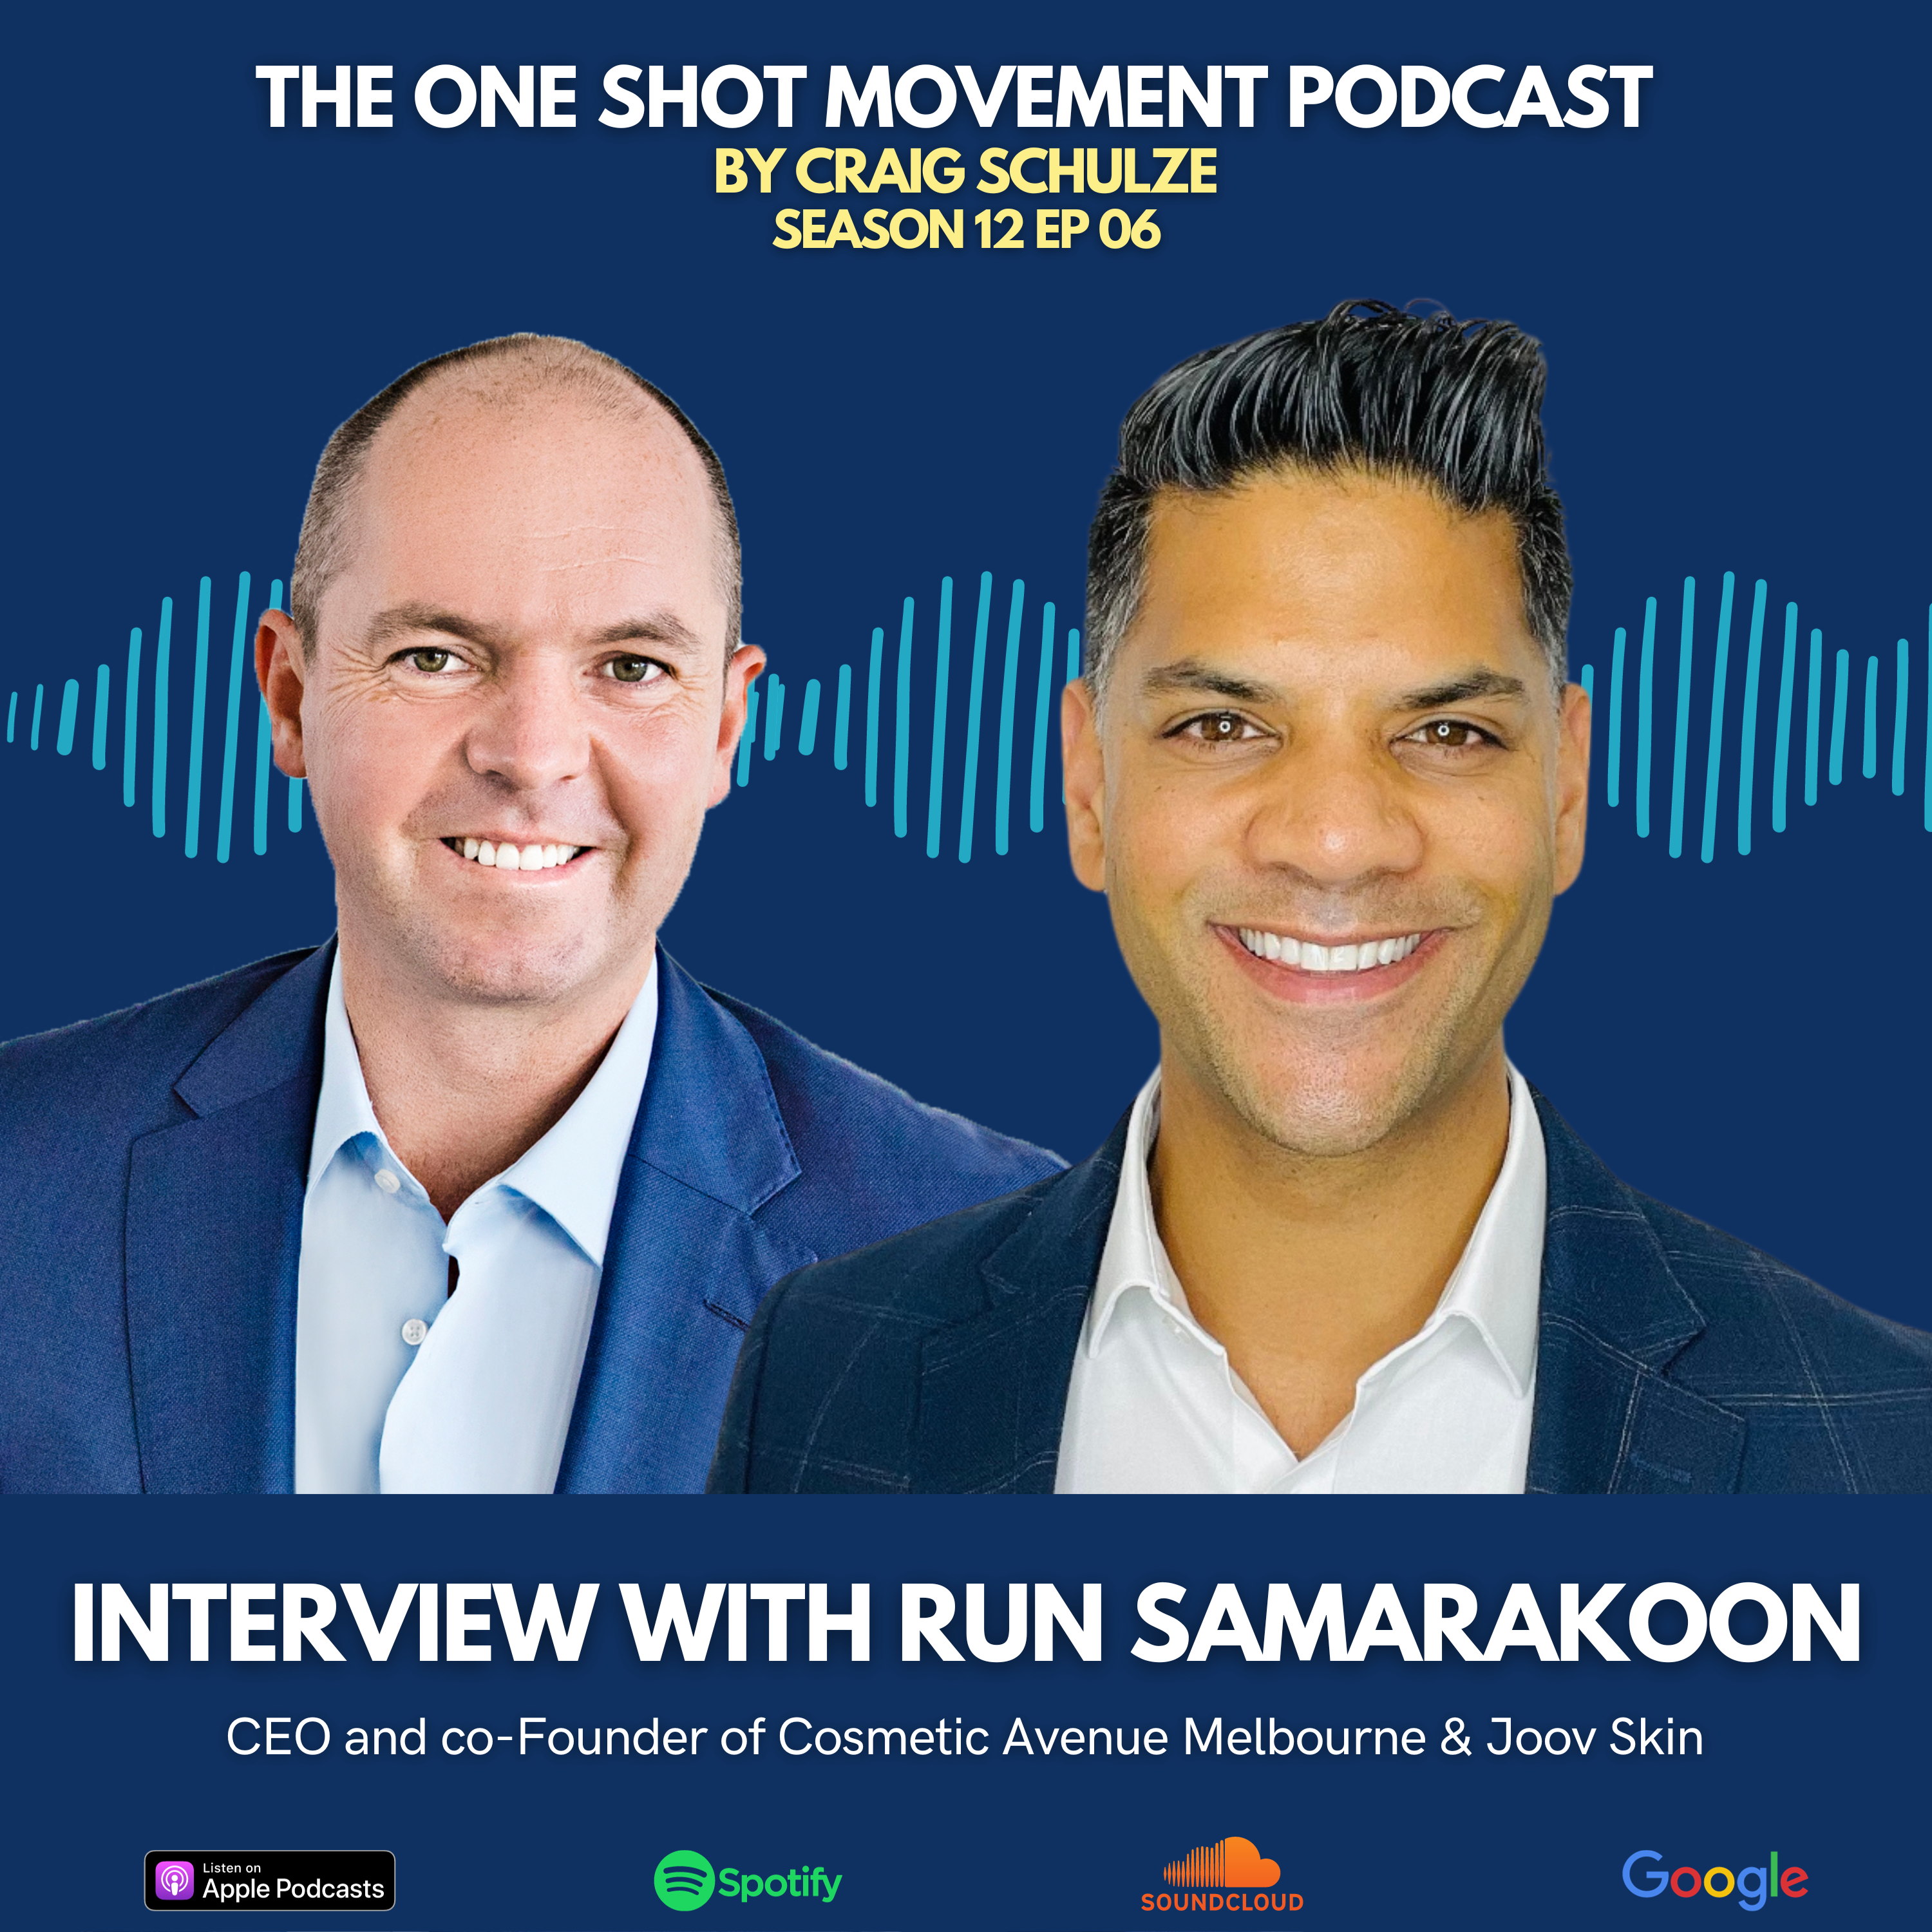 Season 12 Episode 6 - One Shot Movement Podcast - INTERVIEW WITH Run Samarakoon -  CEO and co-Founder of Cosmetic Avenue Melbourne & Joov Skin.png